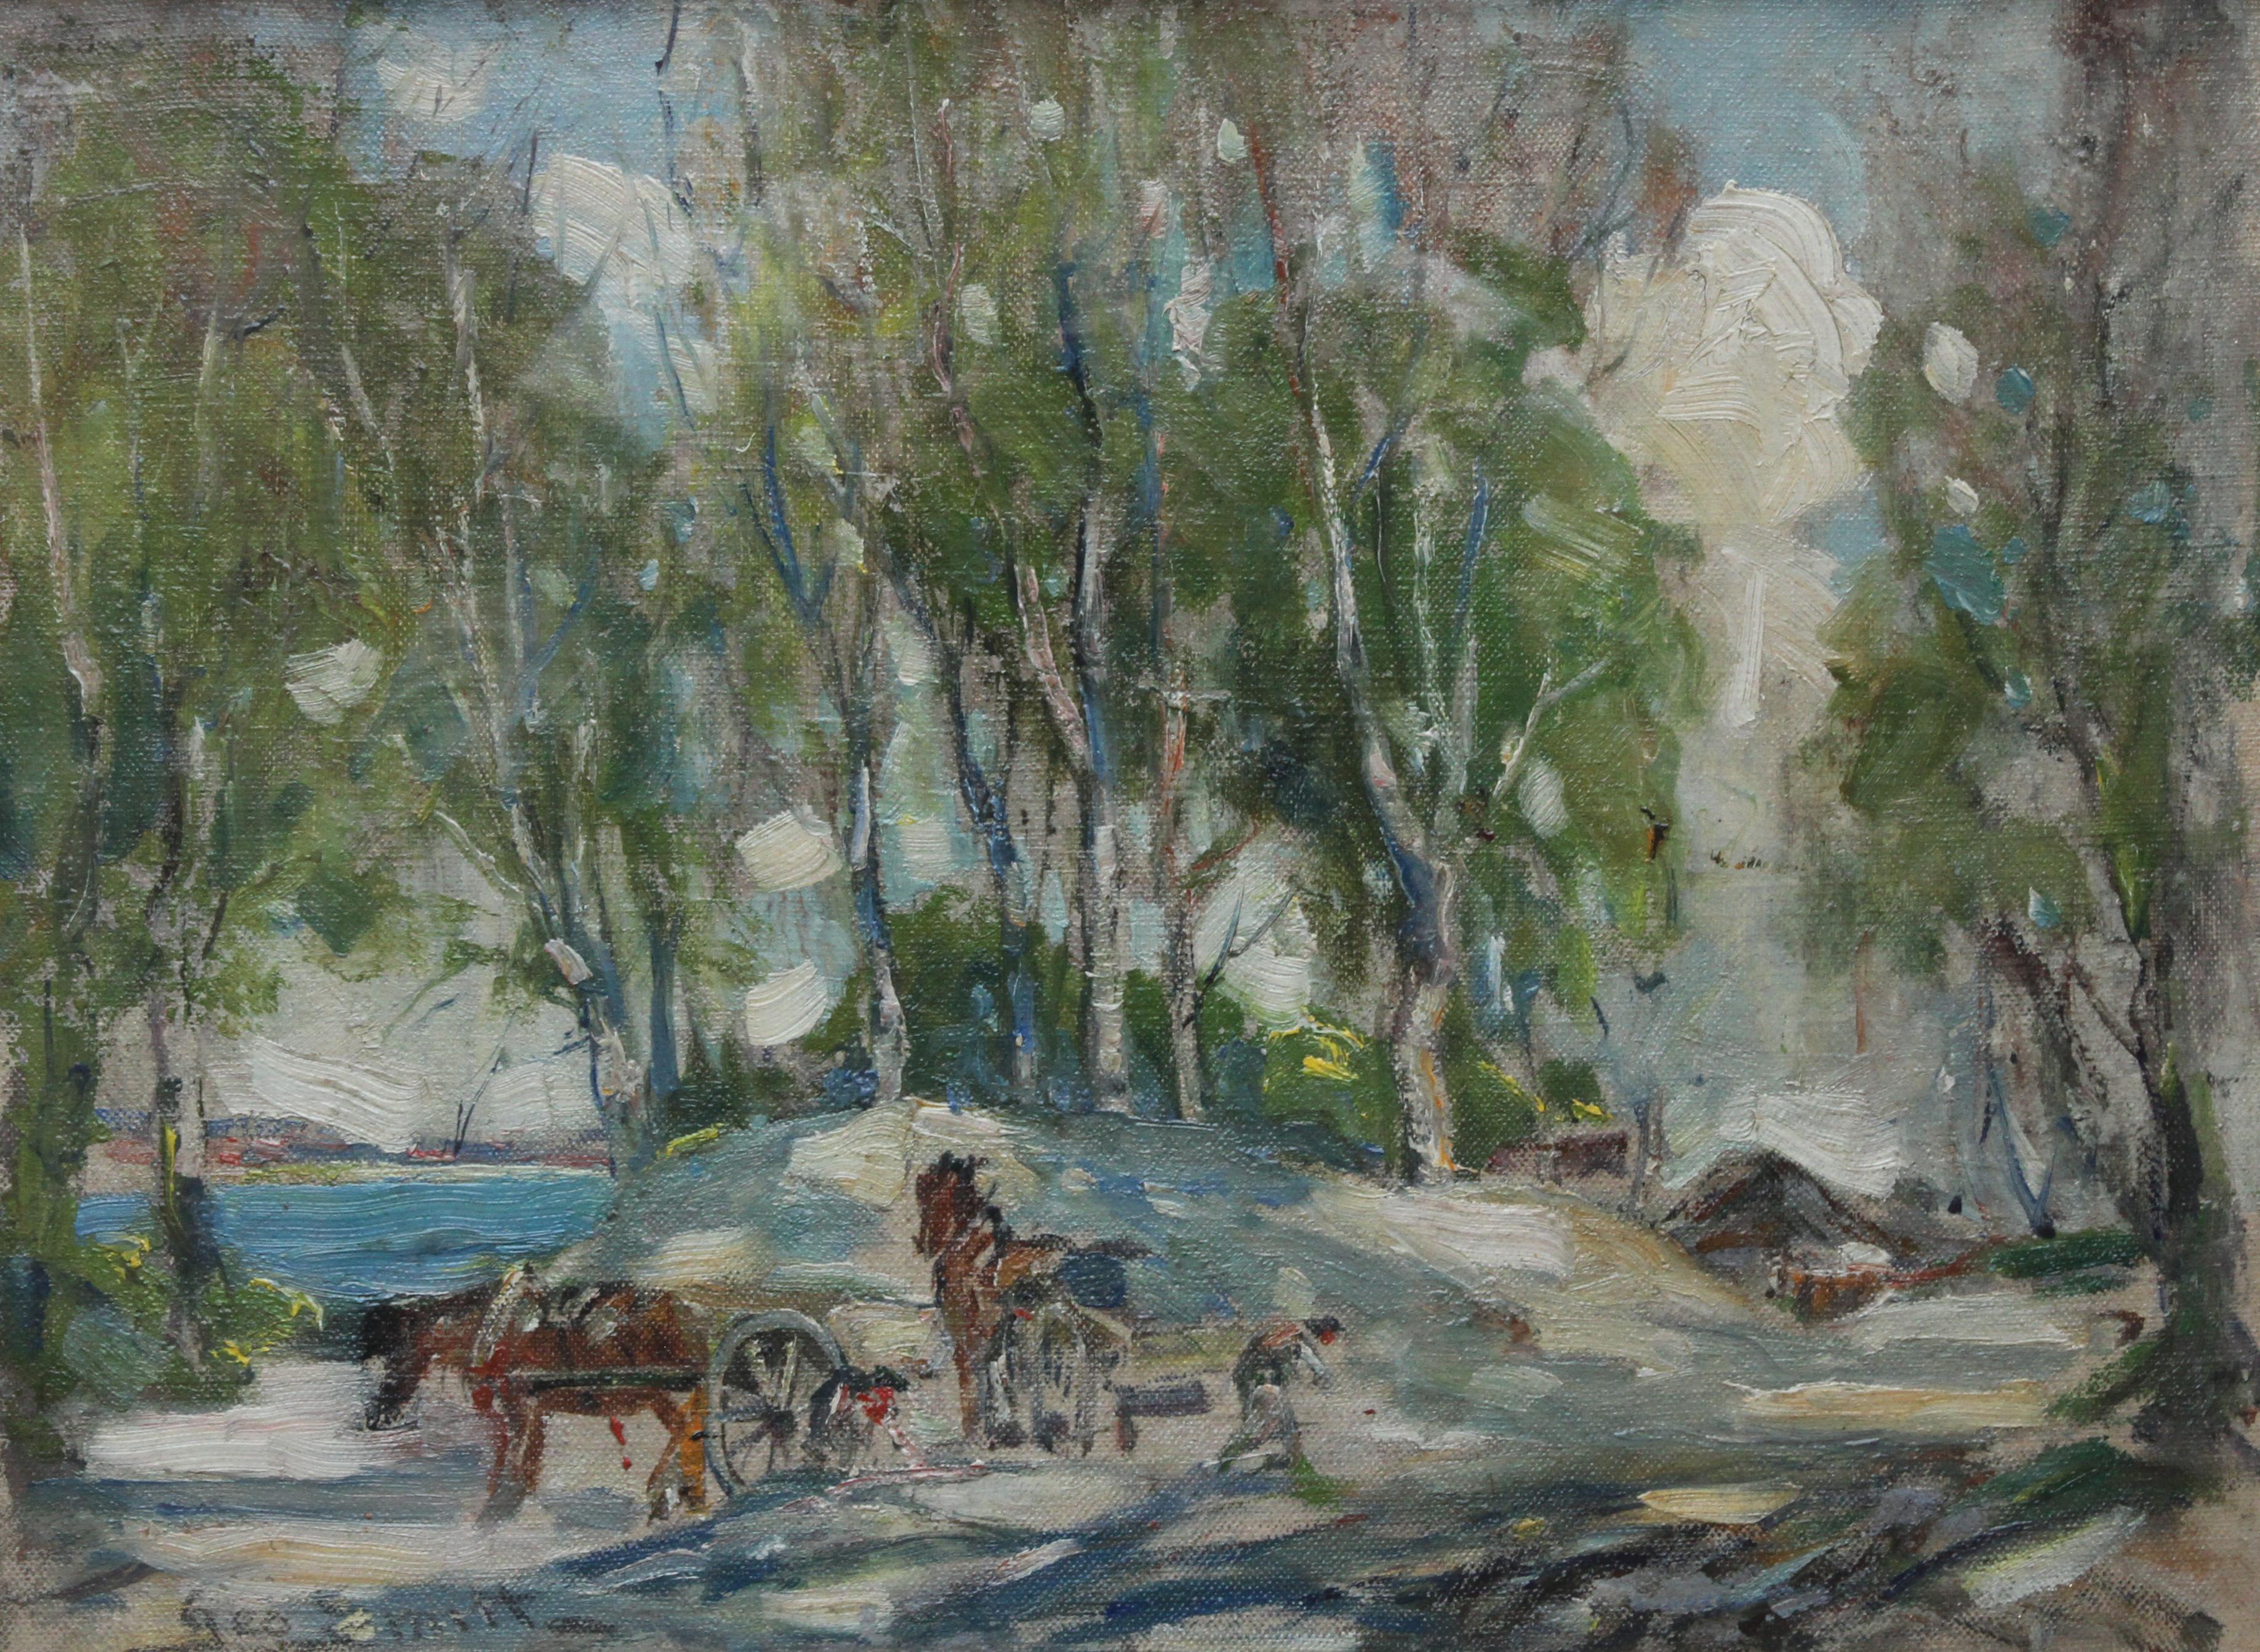 Working Horses in Scottish Landscape - Scottish 1920s art Impressionist painting - Painting by George Smith